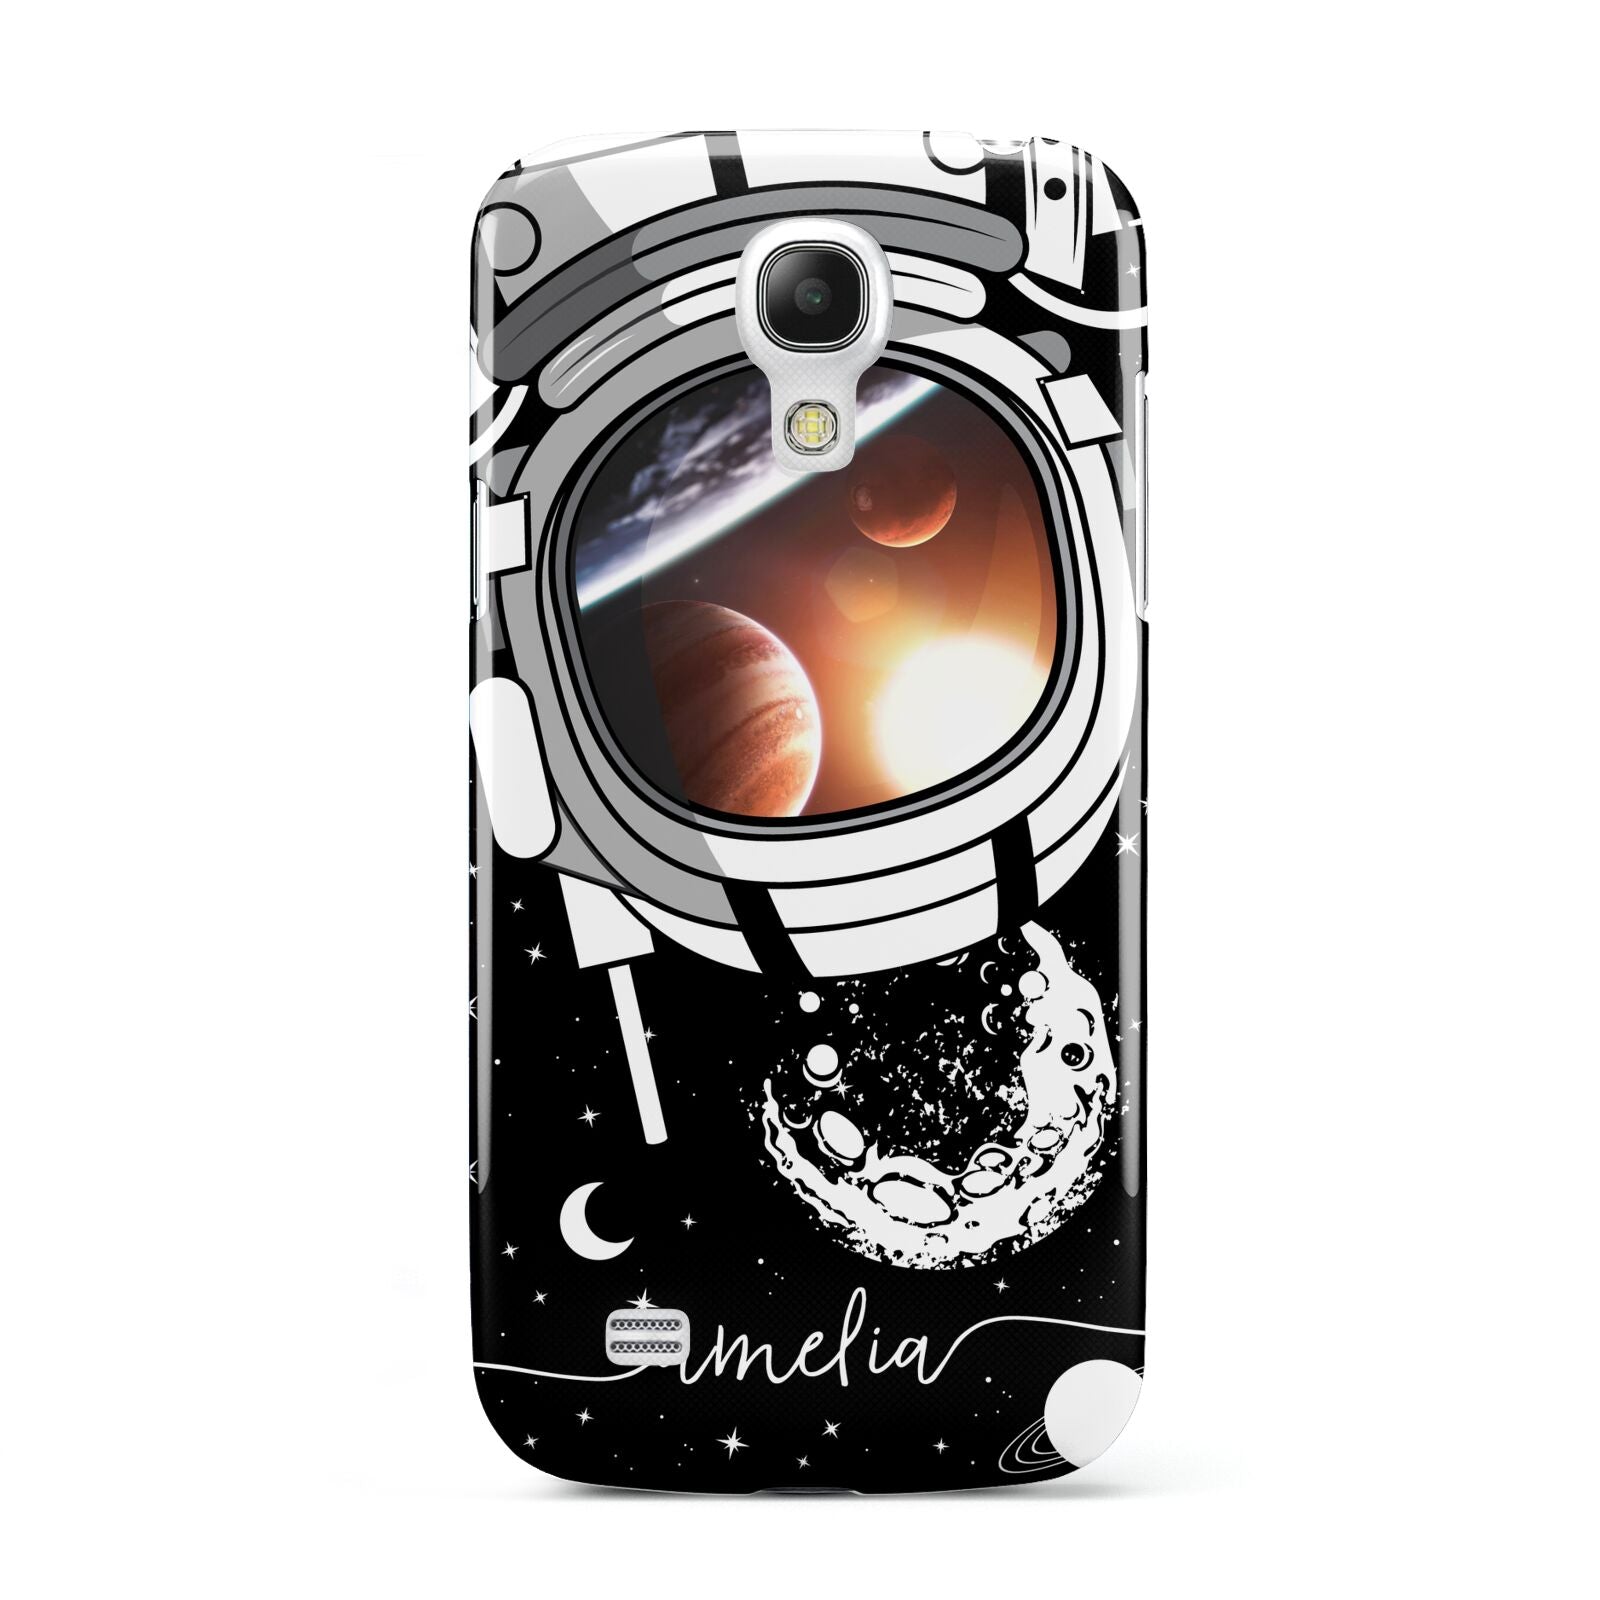 Personalised Astronaut in Space Name Samsung Galaxy S4 Mini Case